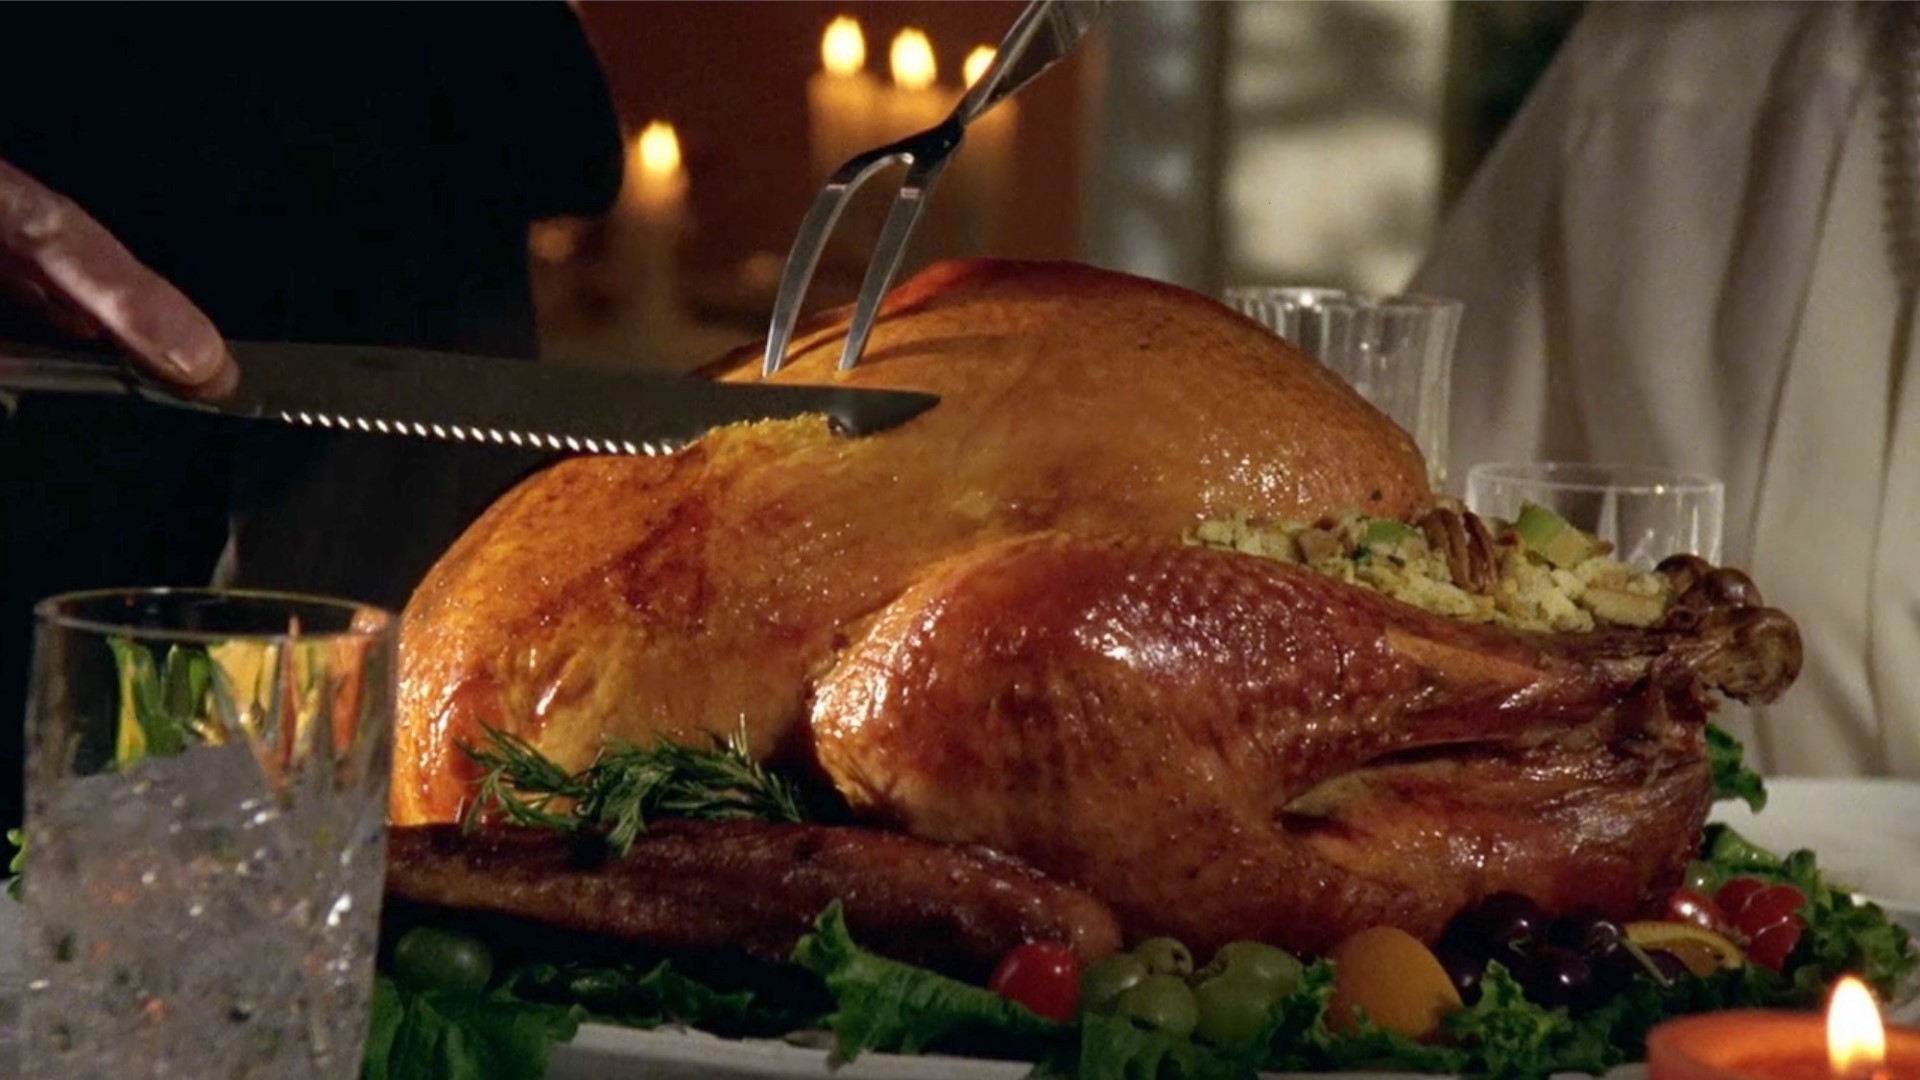 Turkey is the all star bird of Thanksgiving, but is it actually healthy for us to eat? Buzz60's Lenneia Batiste has more on what nutritionists say.